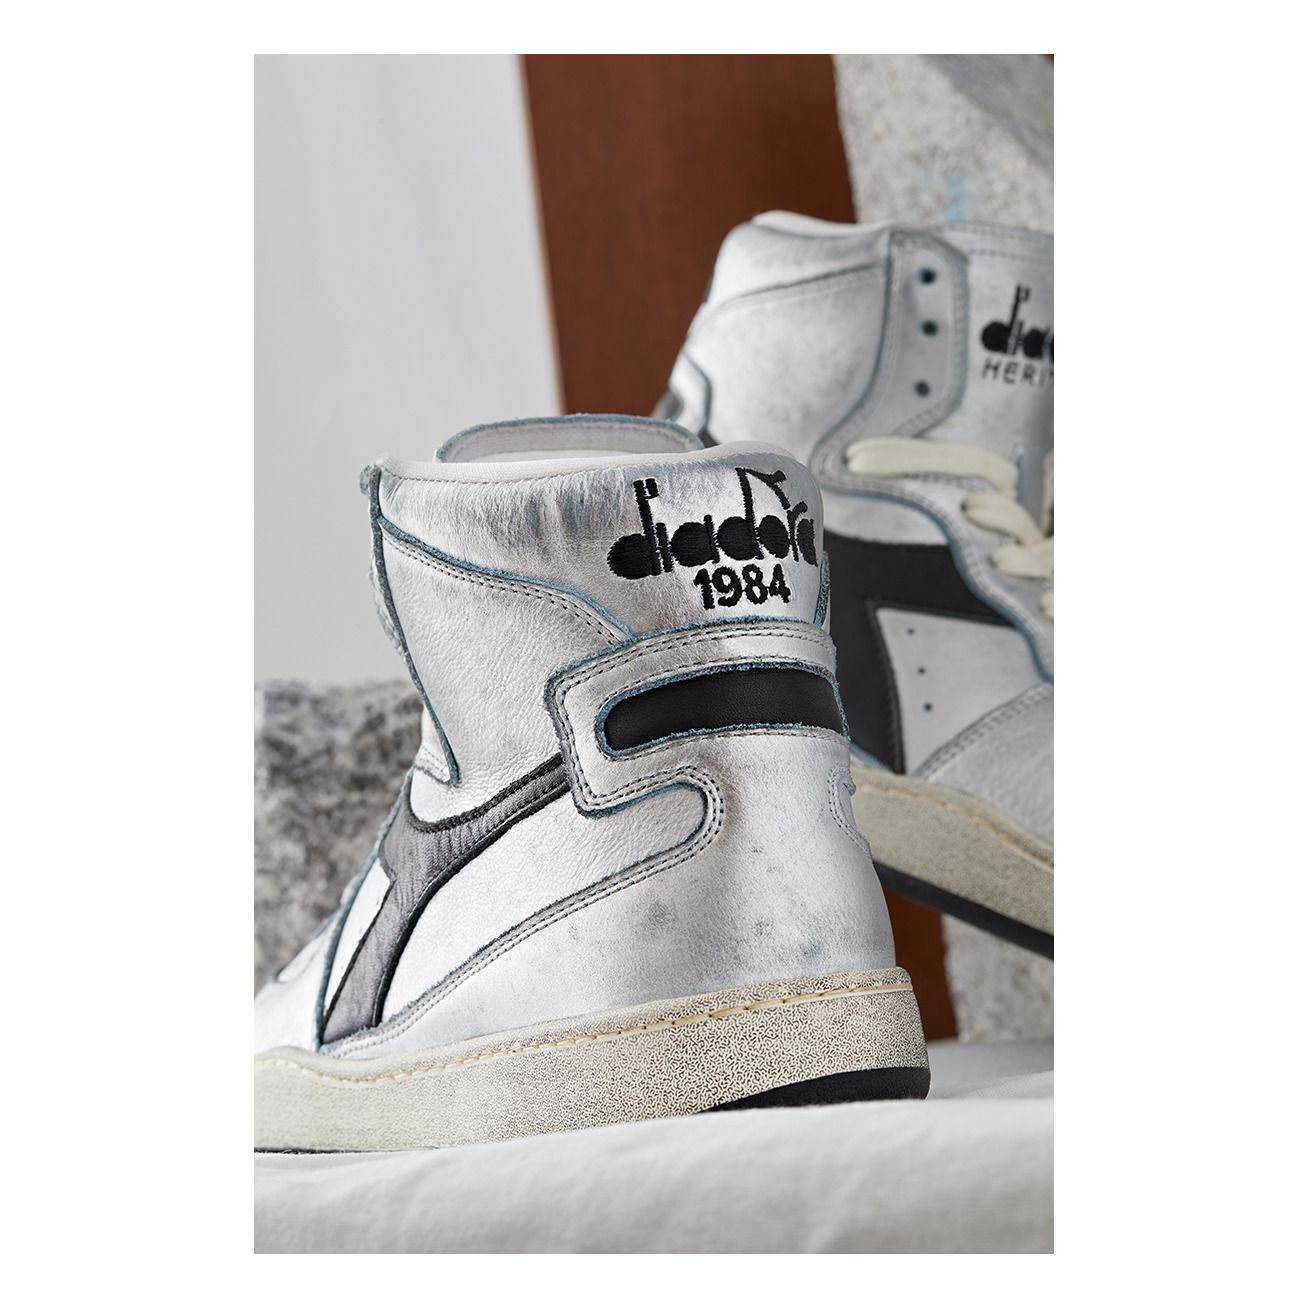 Silver High-Top Sneakers Silver Diadora Heritage Shoes Adult